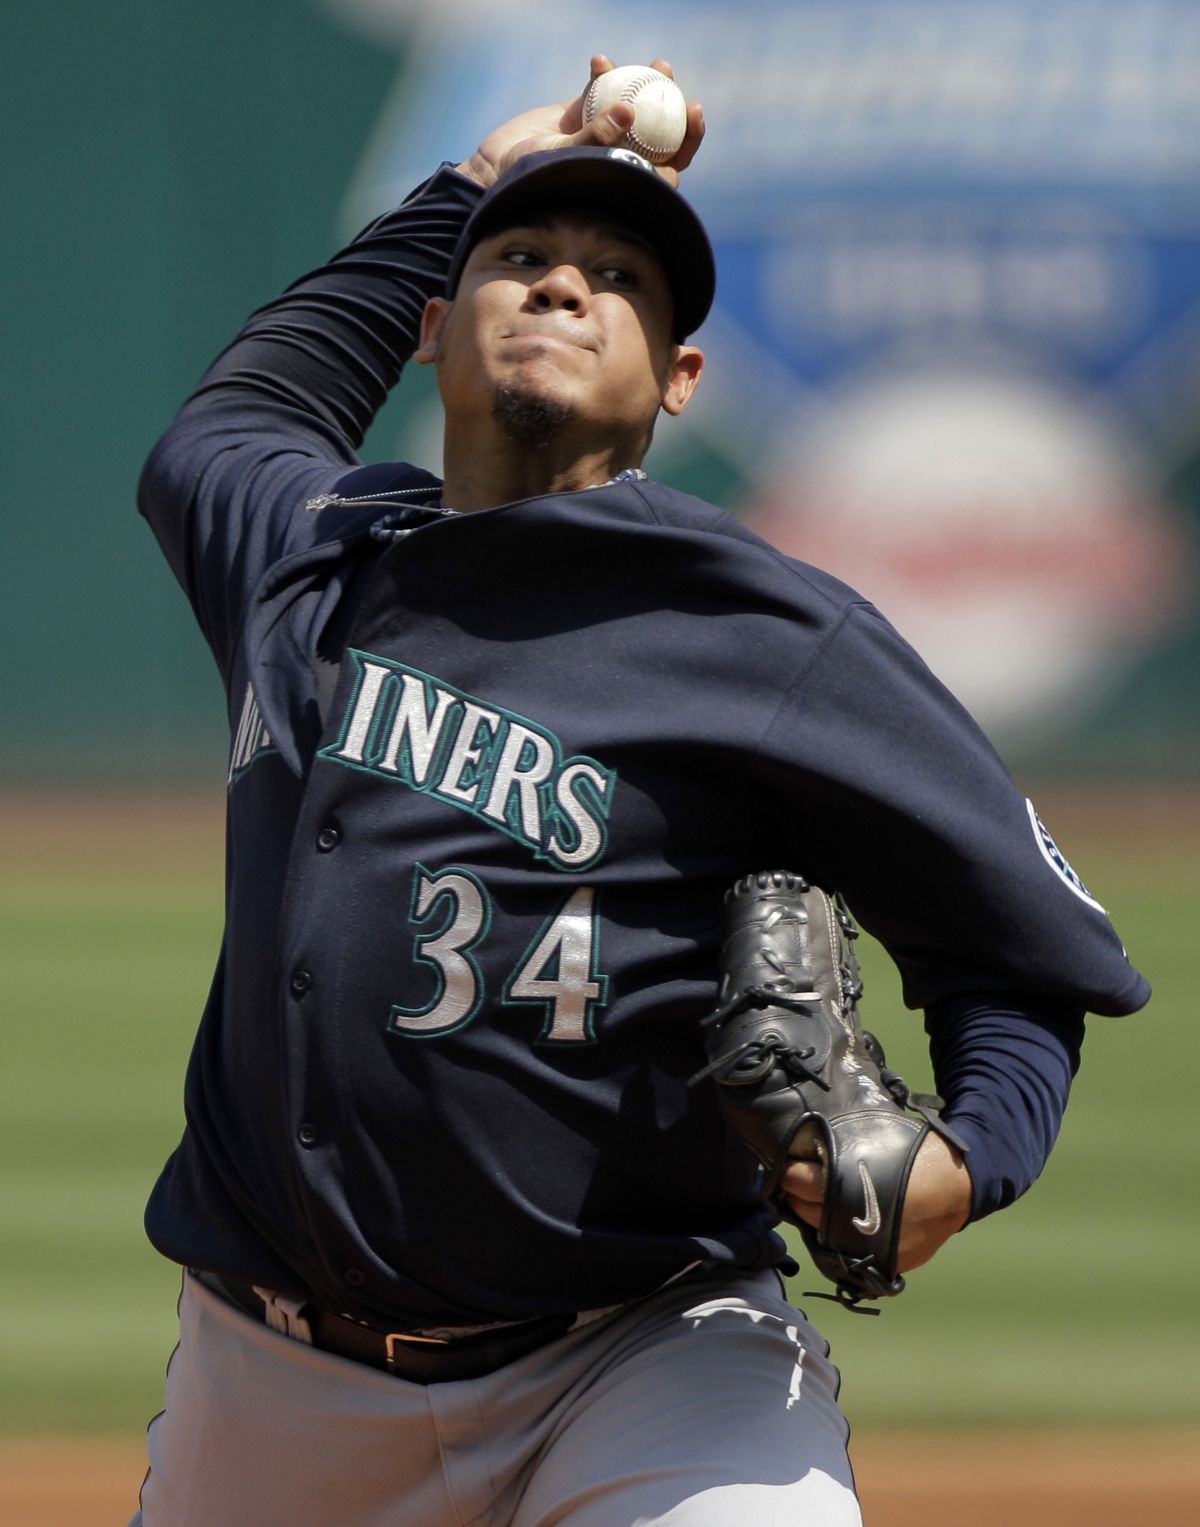 Seattle Mariners starting pitcher Felix Hernandez throws in the first inning against the Cleveland Indians in a baseball game  in Cleveland on Wednesday, Aug. 24, 2011. (Amy Sancetta / Associated Press)